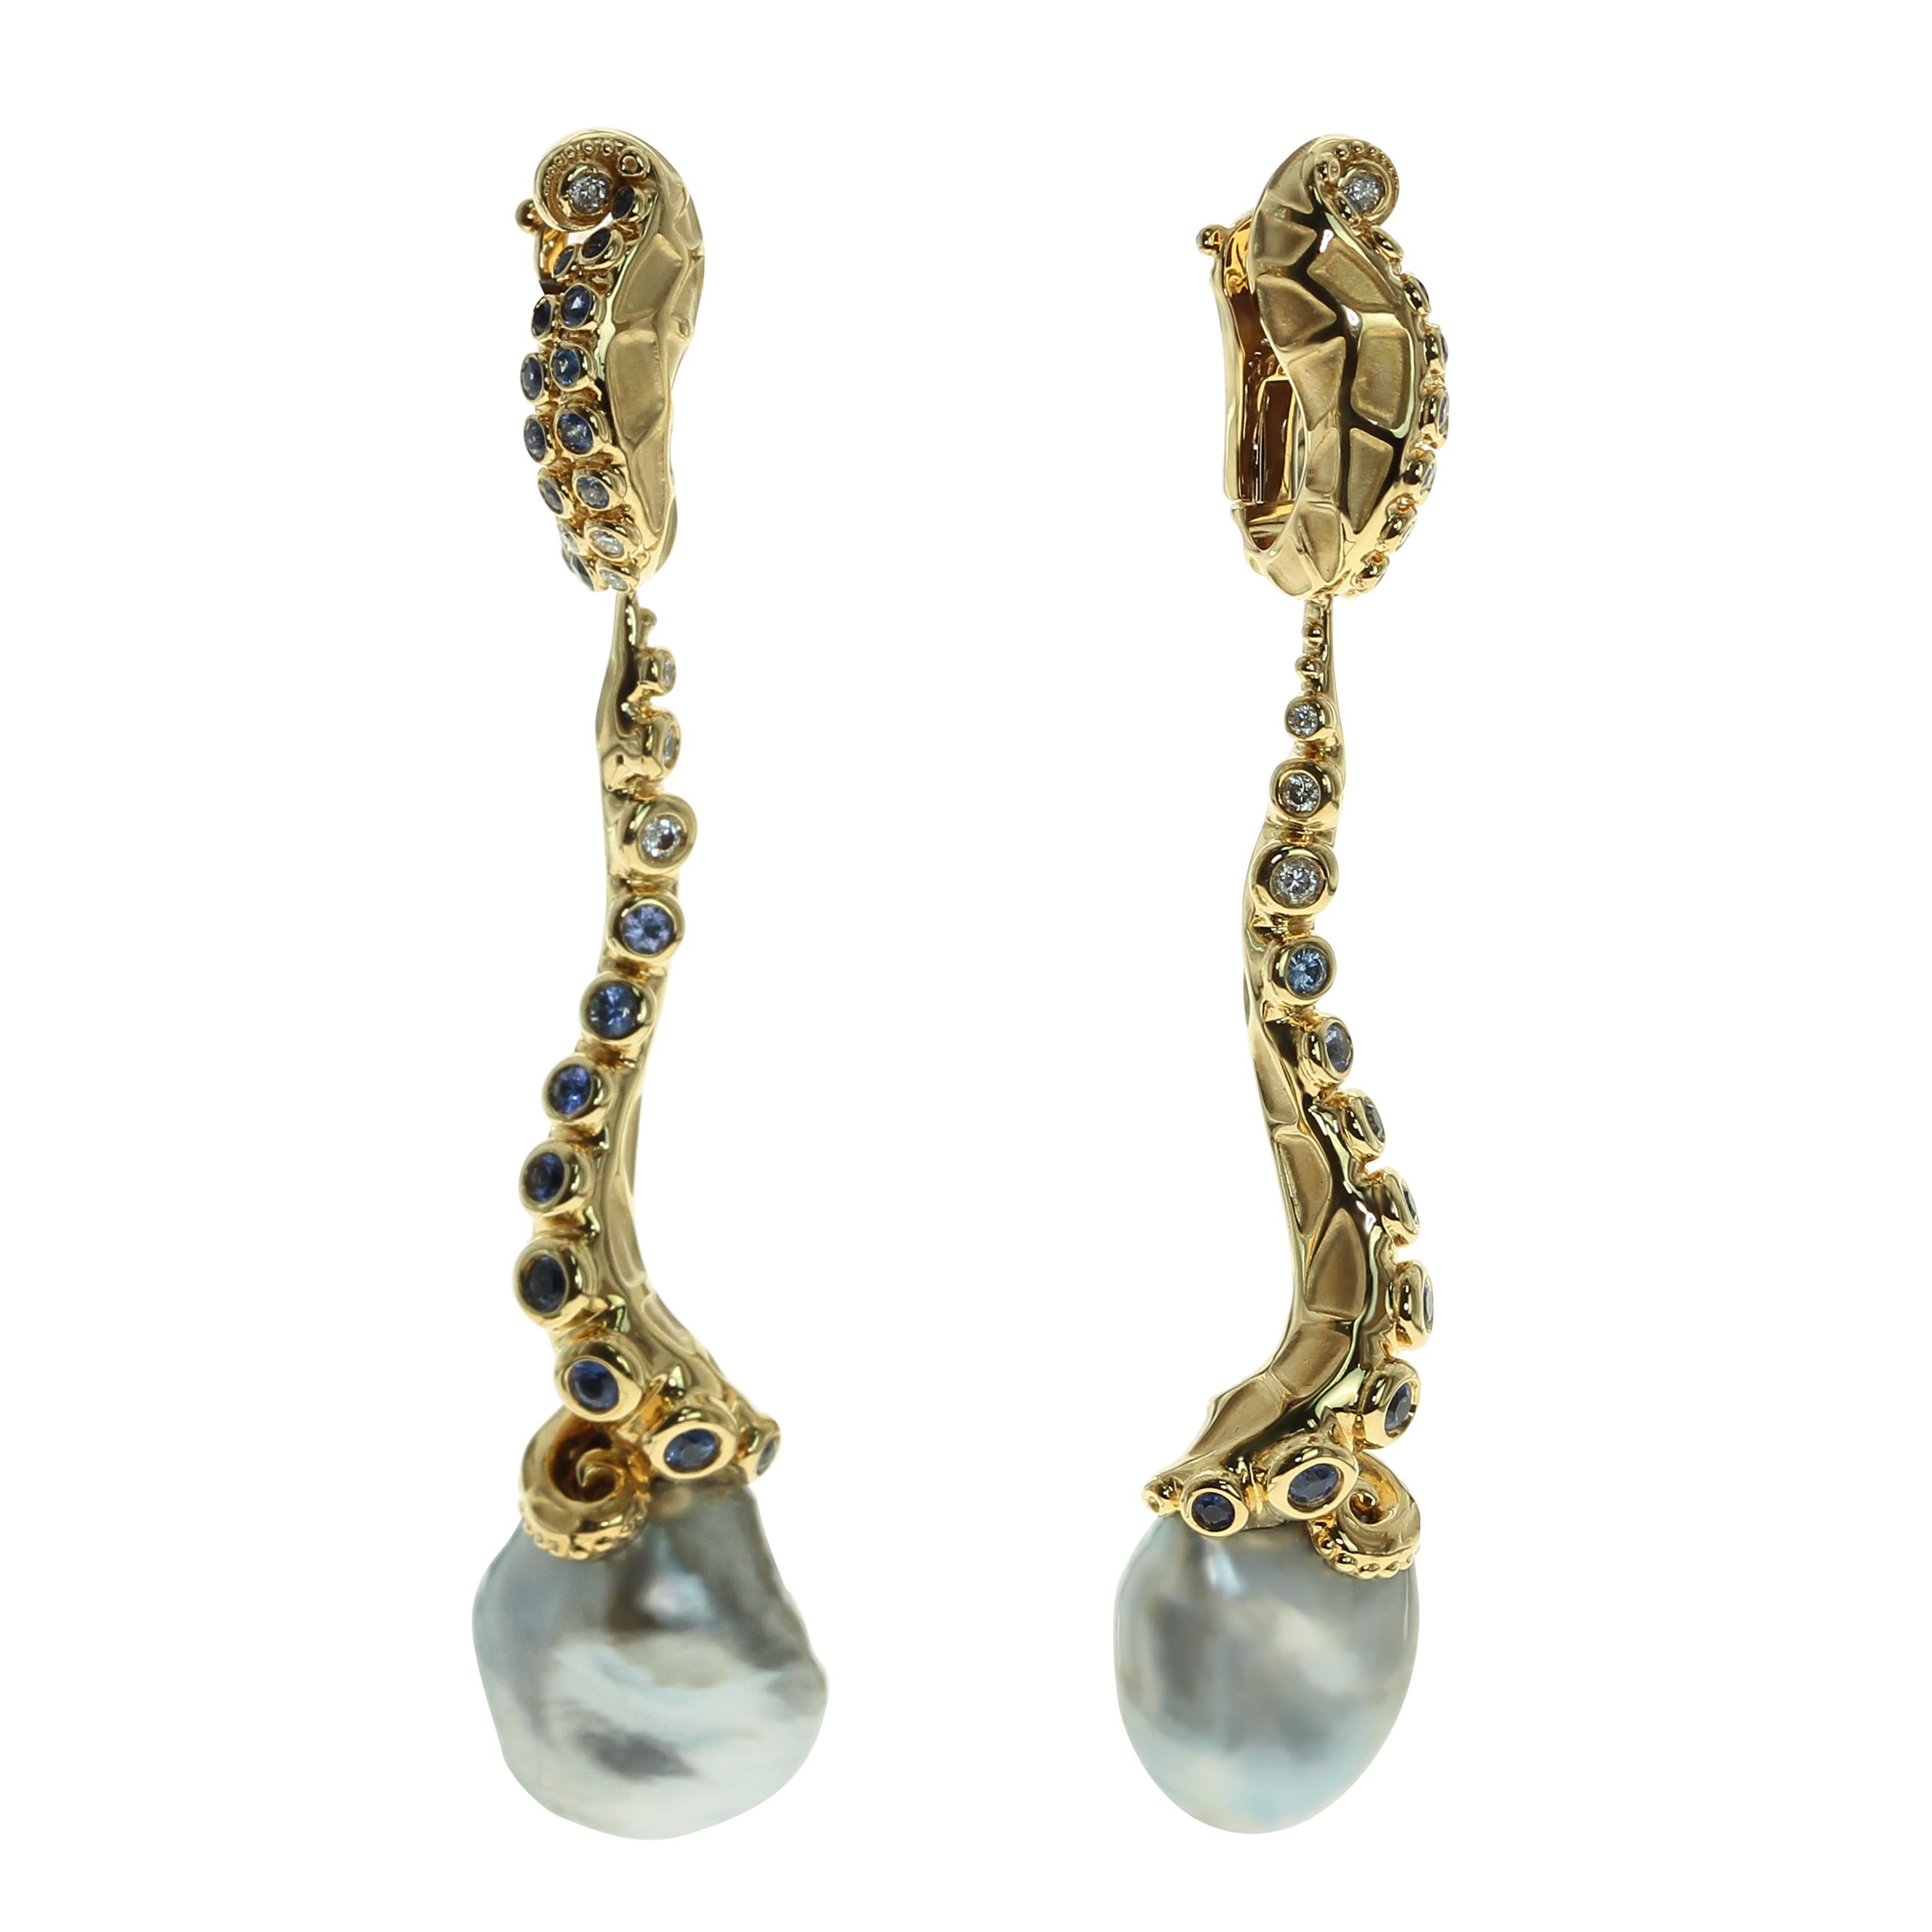 Tahiti Keshi Pearl 21,57 Carat 18 Karat Yellow Gold Octopus Earrings
Earrings are made in the shape of an octopus tentacle in Yellow glossy and matte 18 Karat Gold. At the base of their suckers you can see setted Blue Sapphires and Diamonds. At the